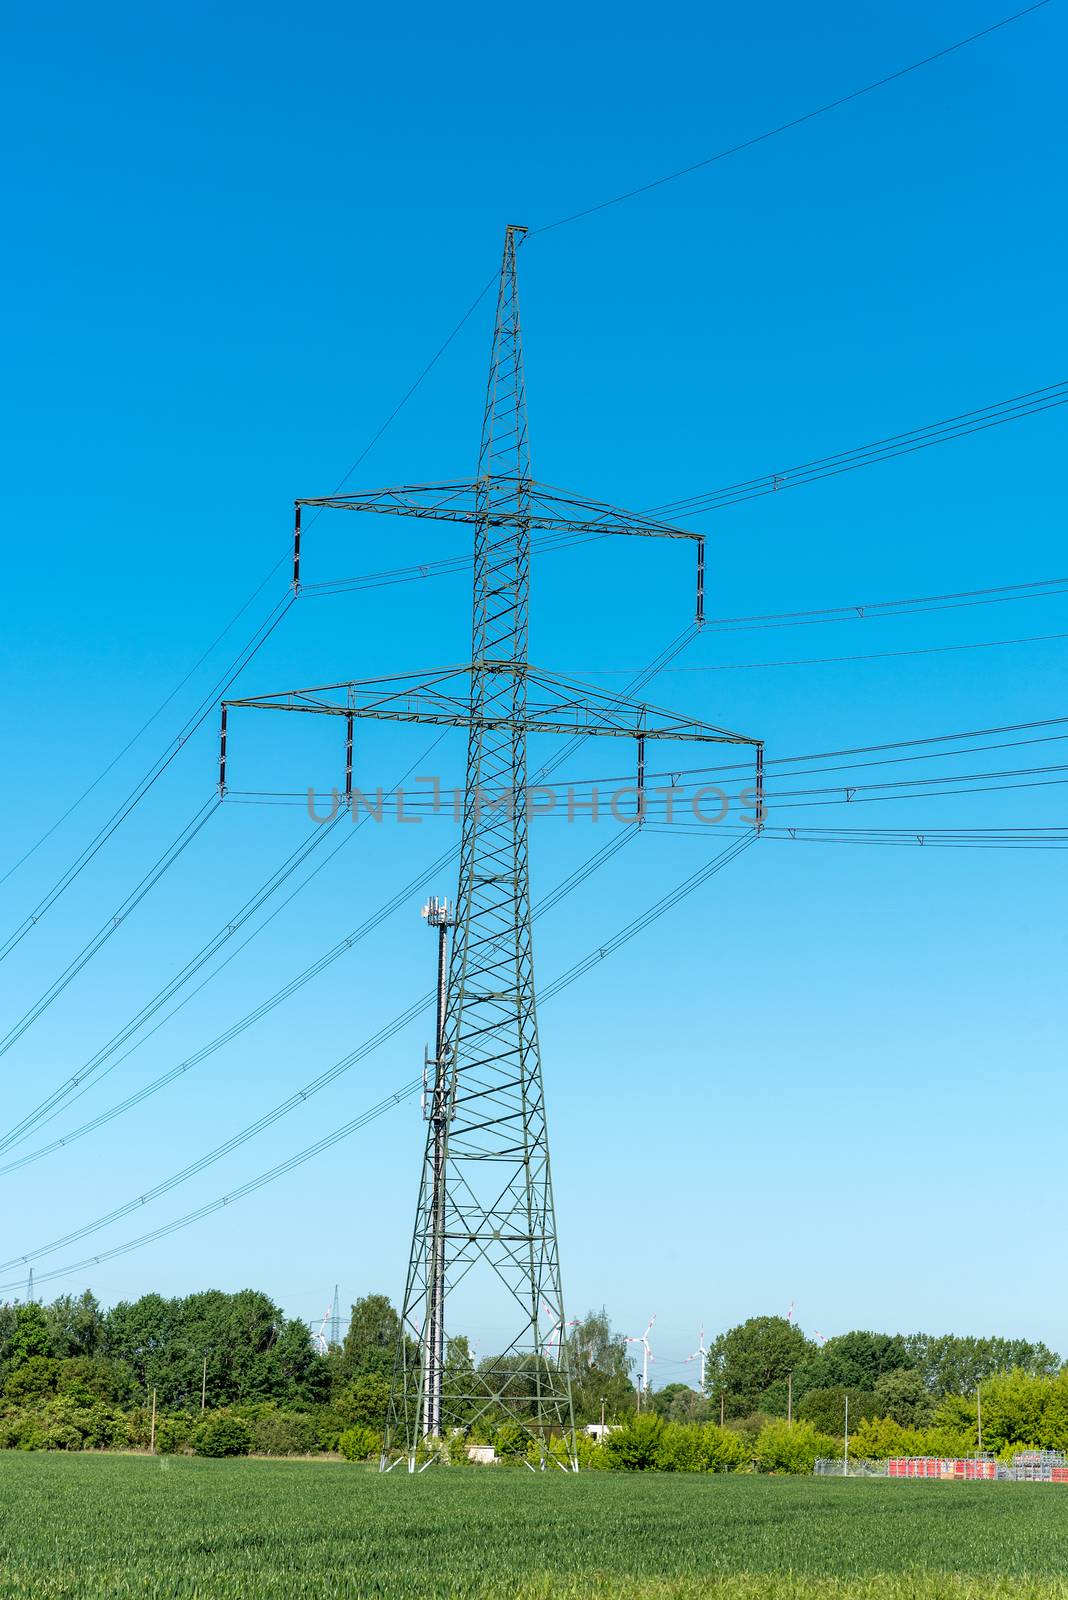 Power supply lines and electric pylons on a sunny day seen in Germany